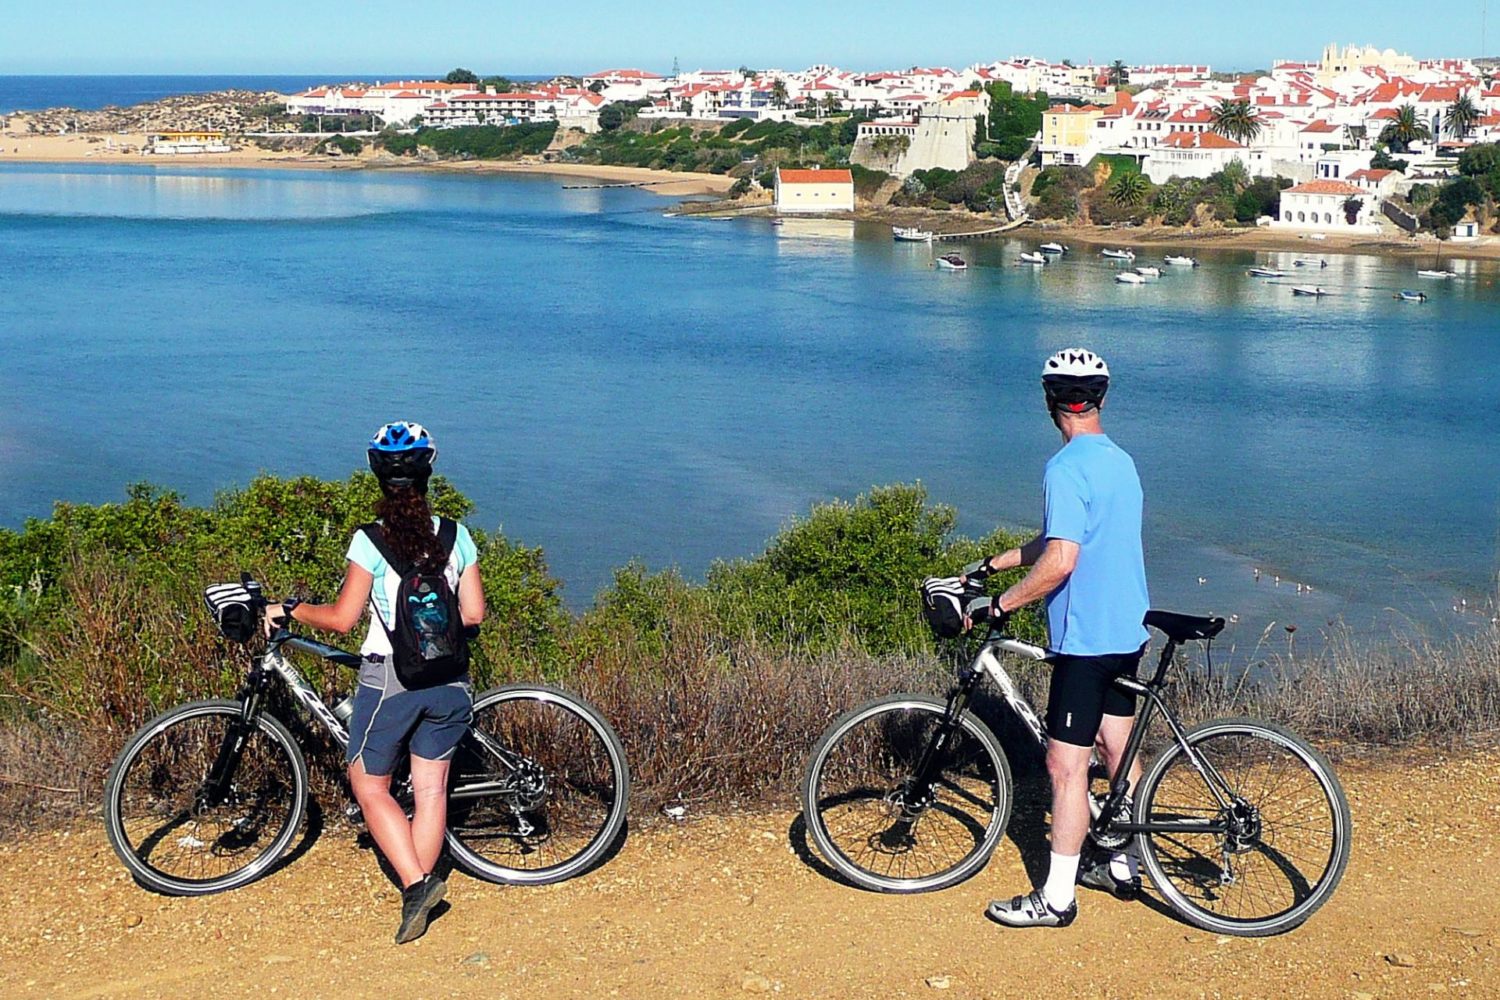 Self guided cycling tour of Portugal's Atlantic coast